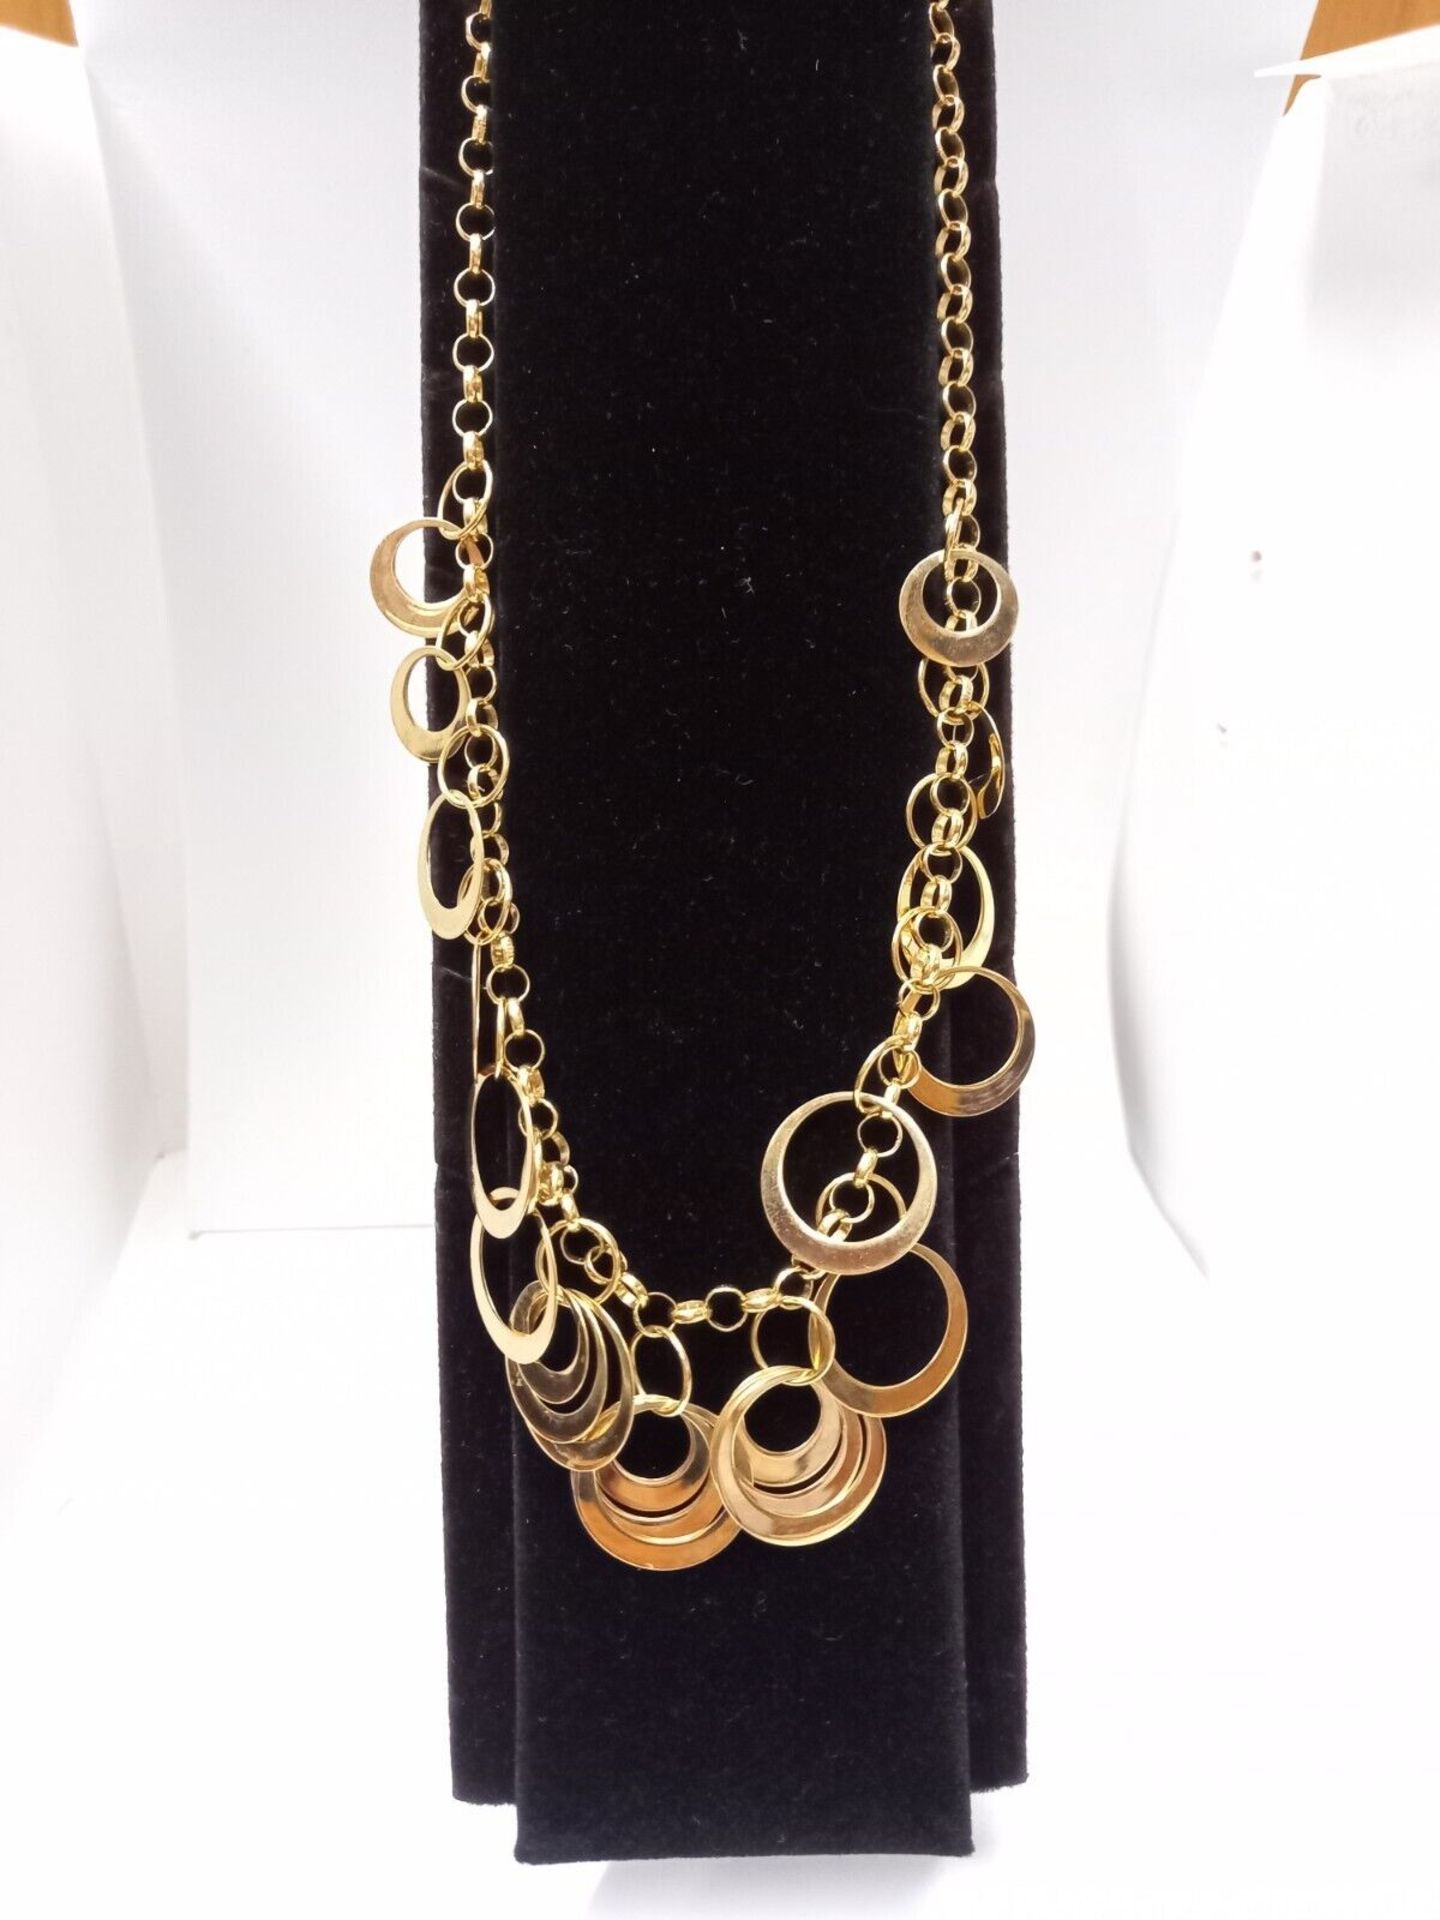 GOLD MULTI CIRCLES VERMEIL 925 SILVER ITALY NECKLACE - Image 2 of 3